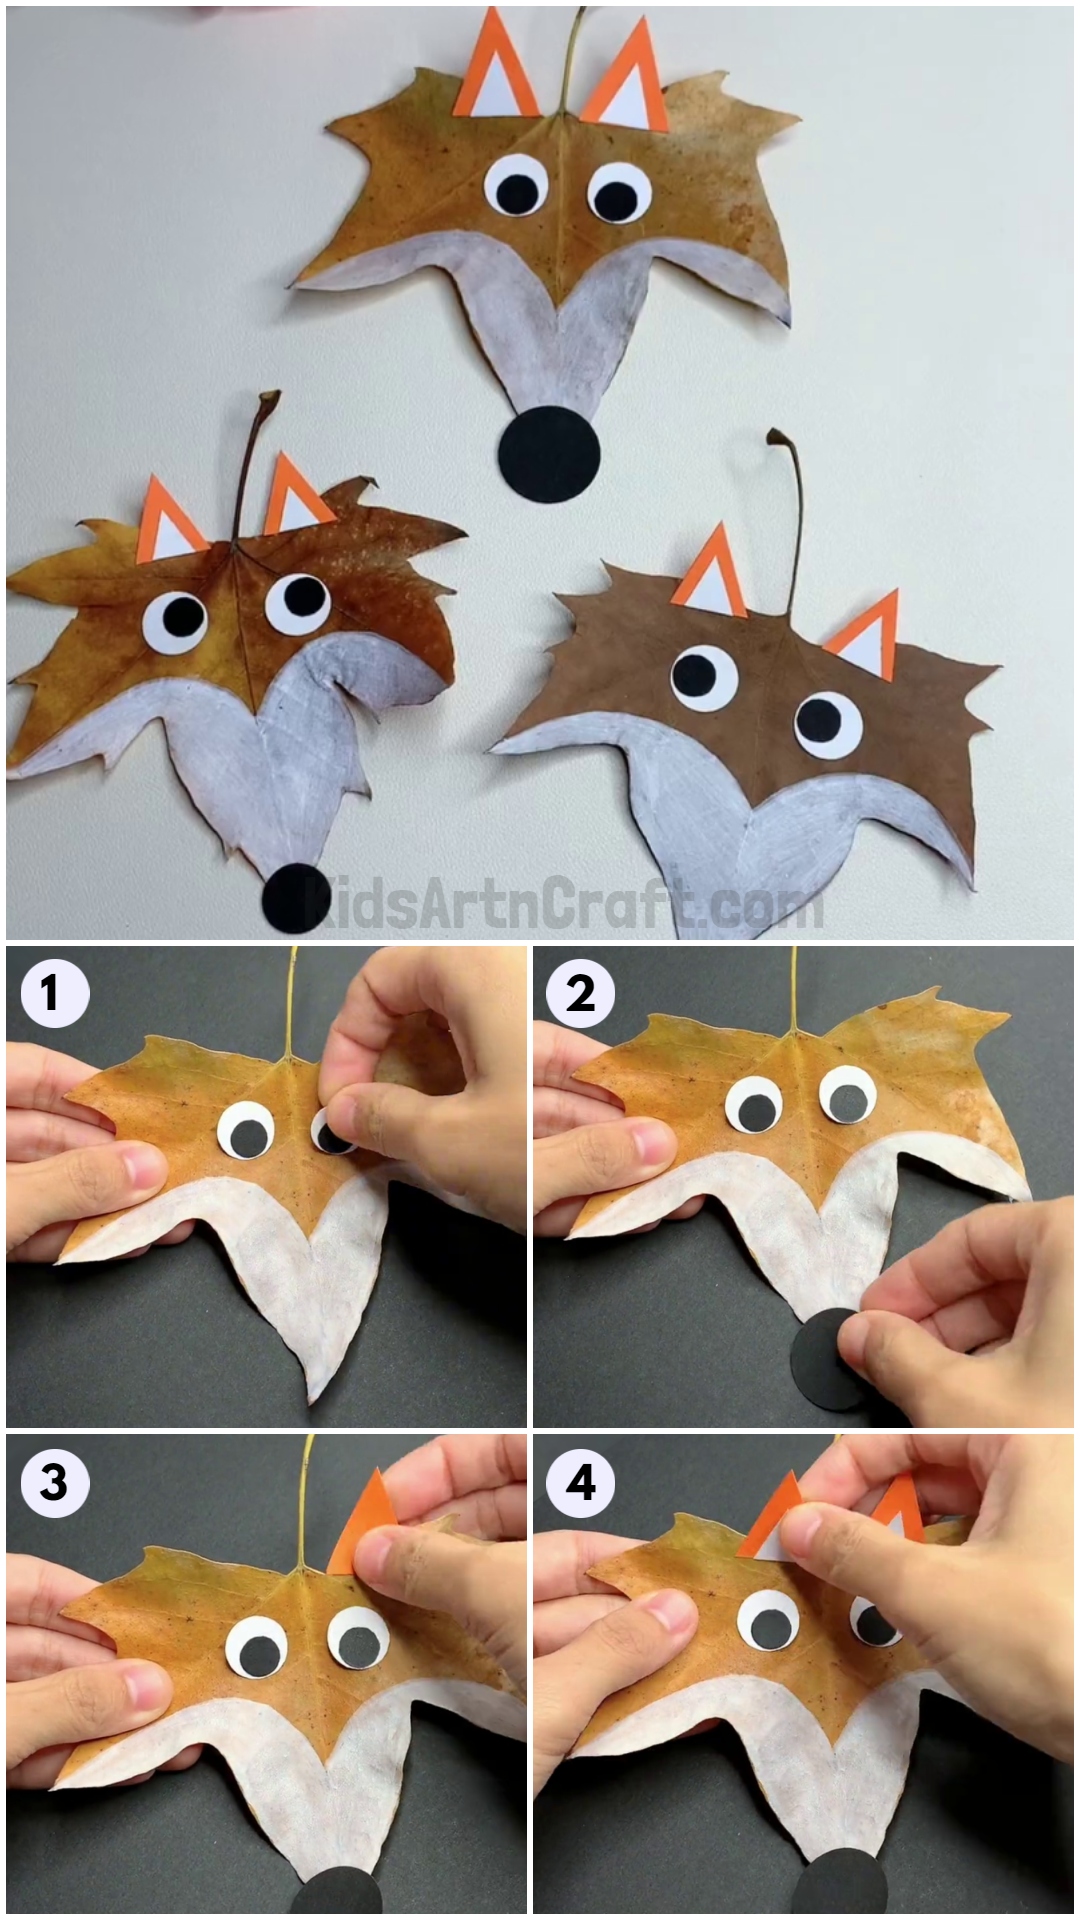 Learn to Make Leaf Fox Craft Tutorial for Kids